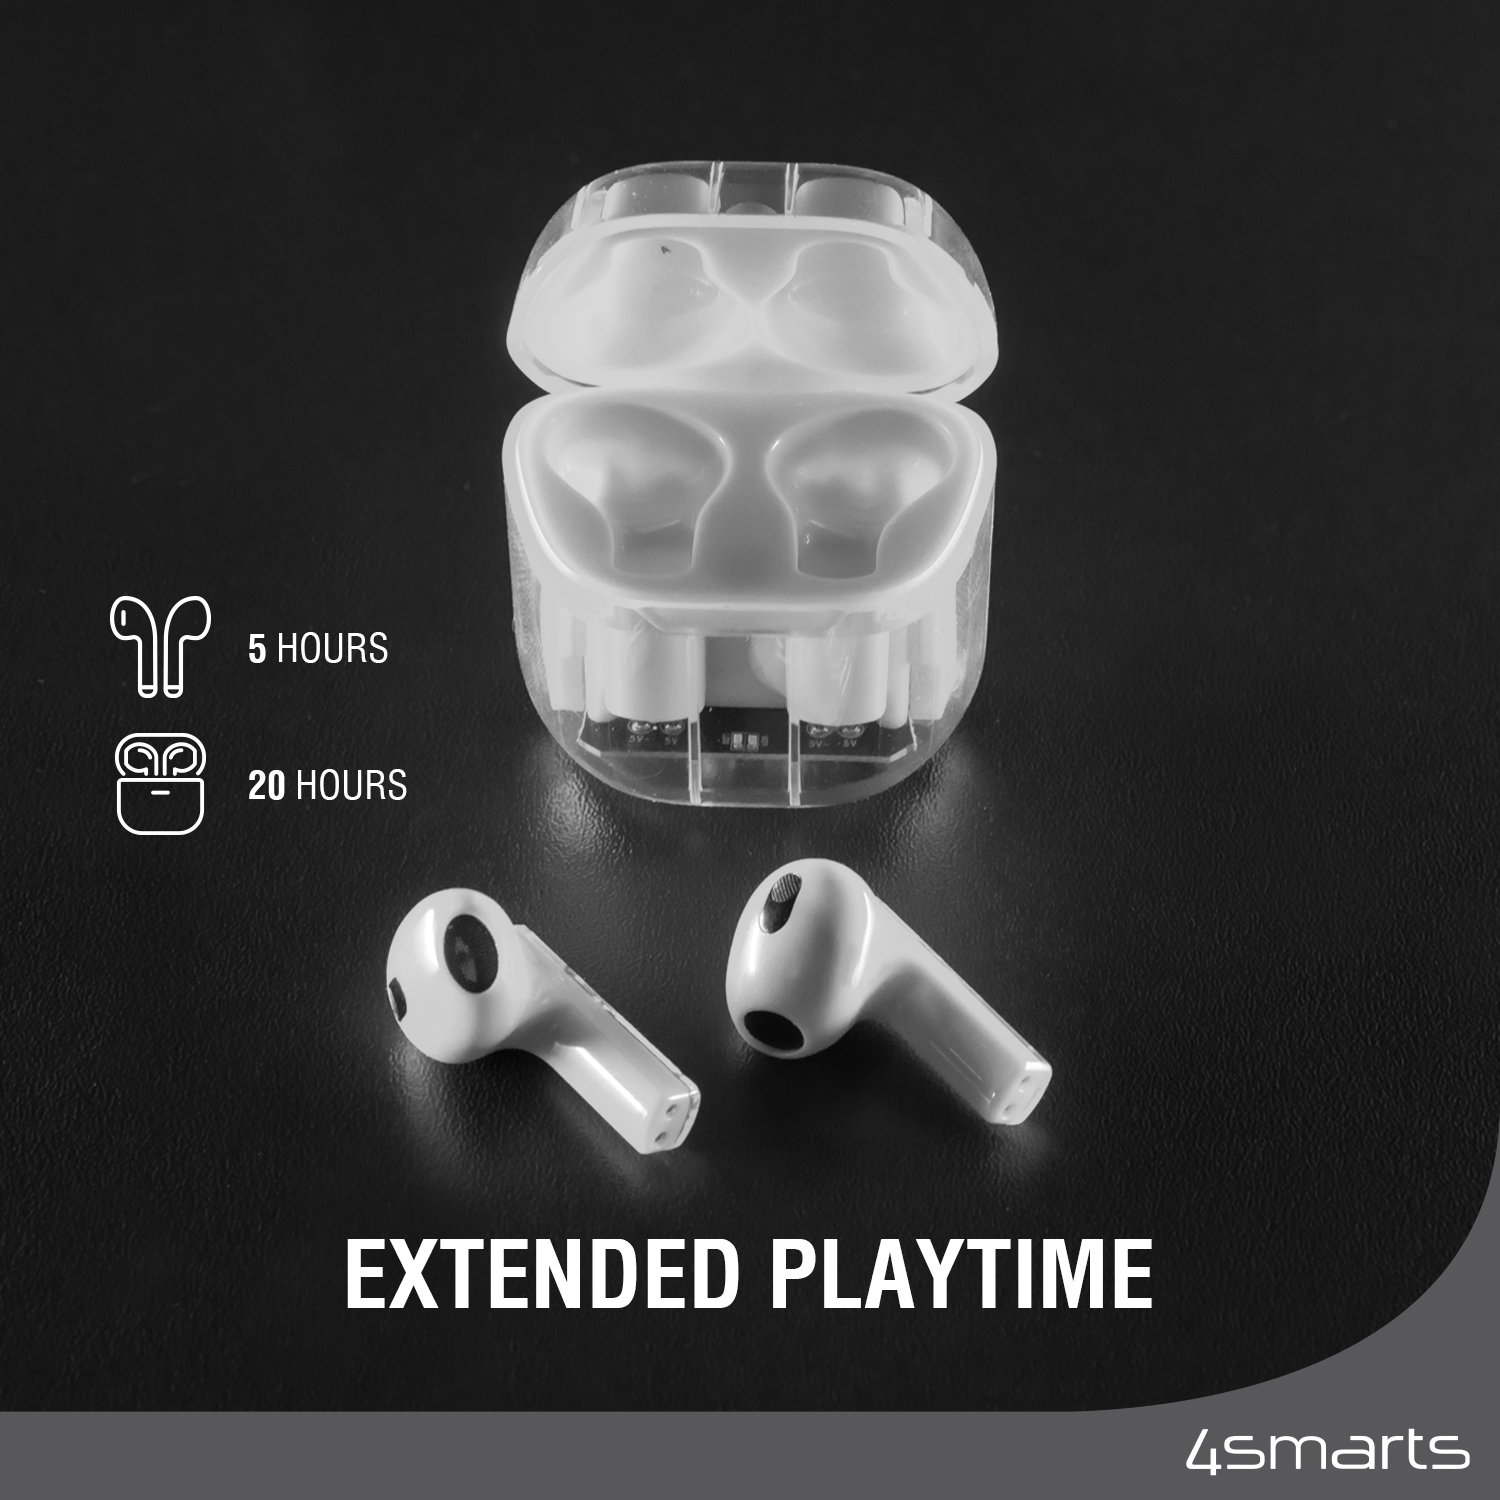 The TWS Lucid bluetooth headphones have extended playtime.